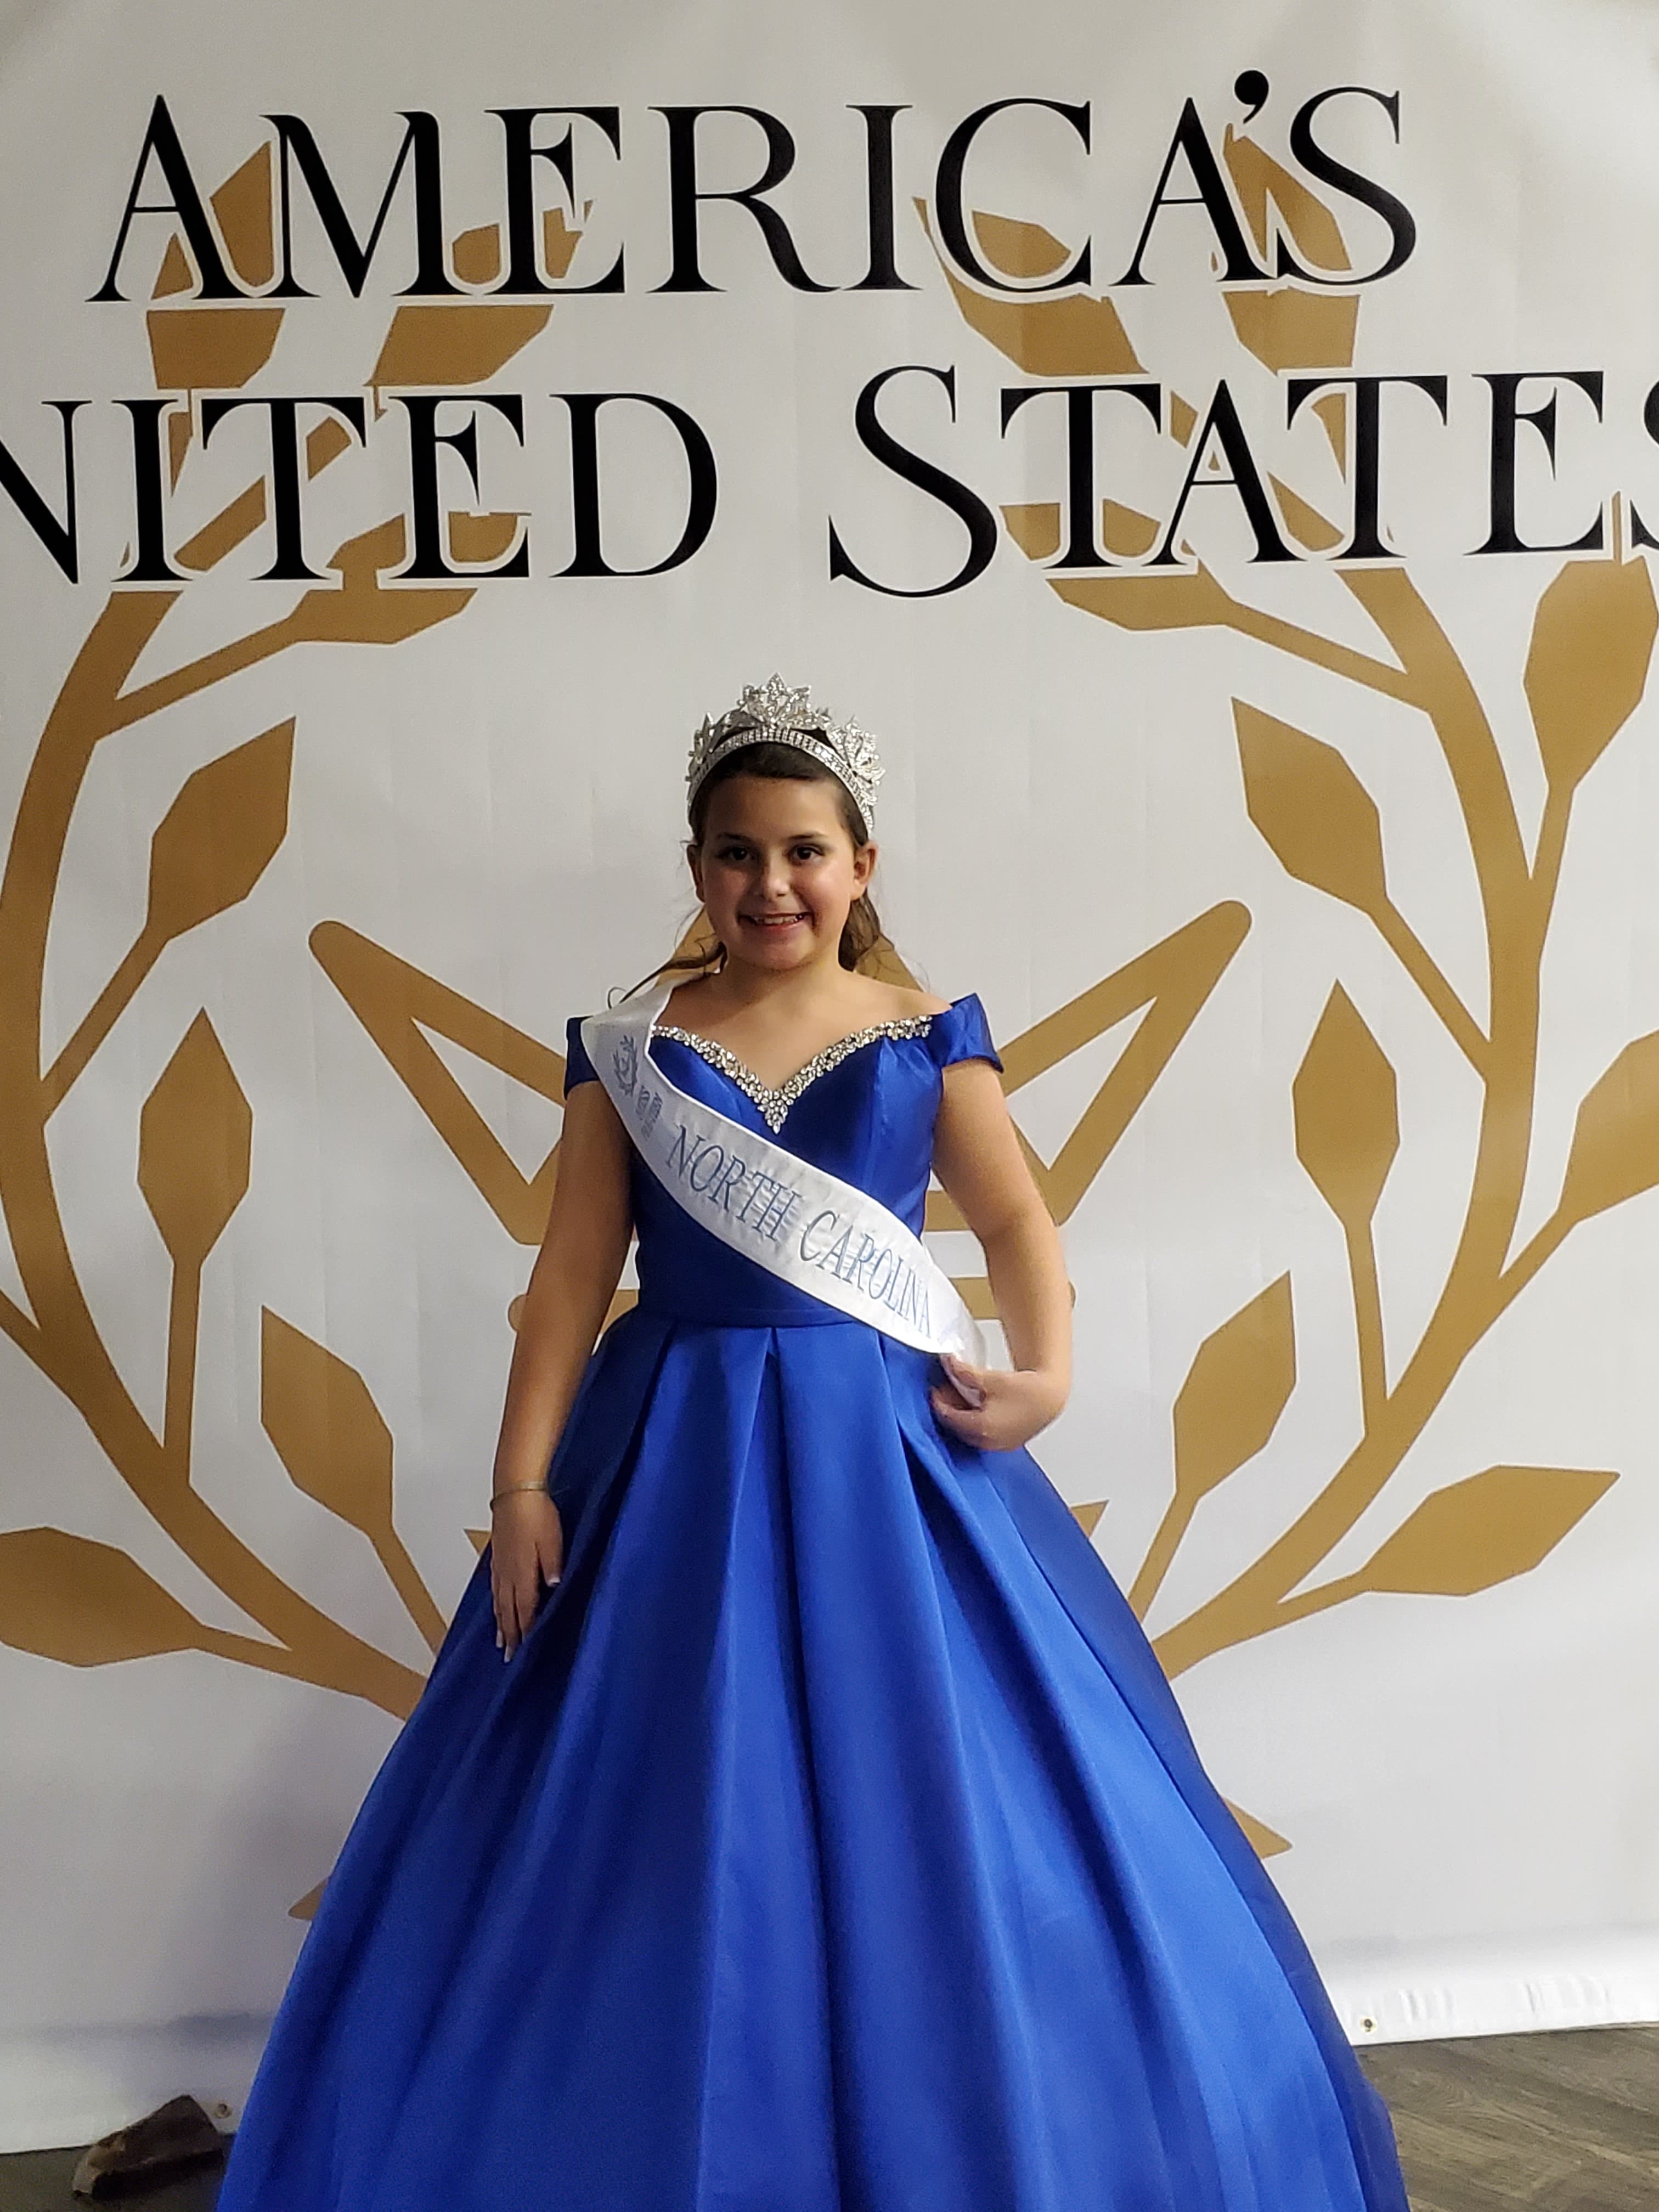 Katelynn Sillman poses for a photo while wearing her pageant attire. Sillman, 10, was crowned Miss Pre-Teen North Carolina earleir this month and received a sash and crown. (Submitted photo)